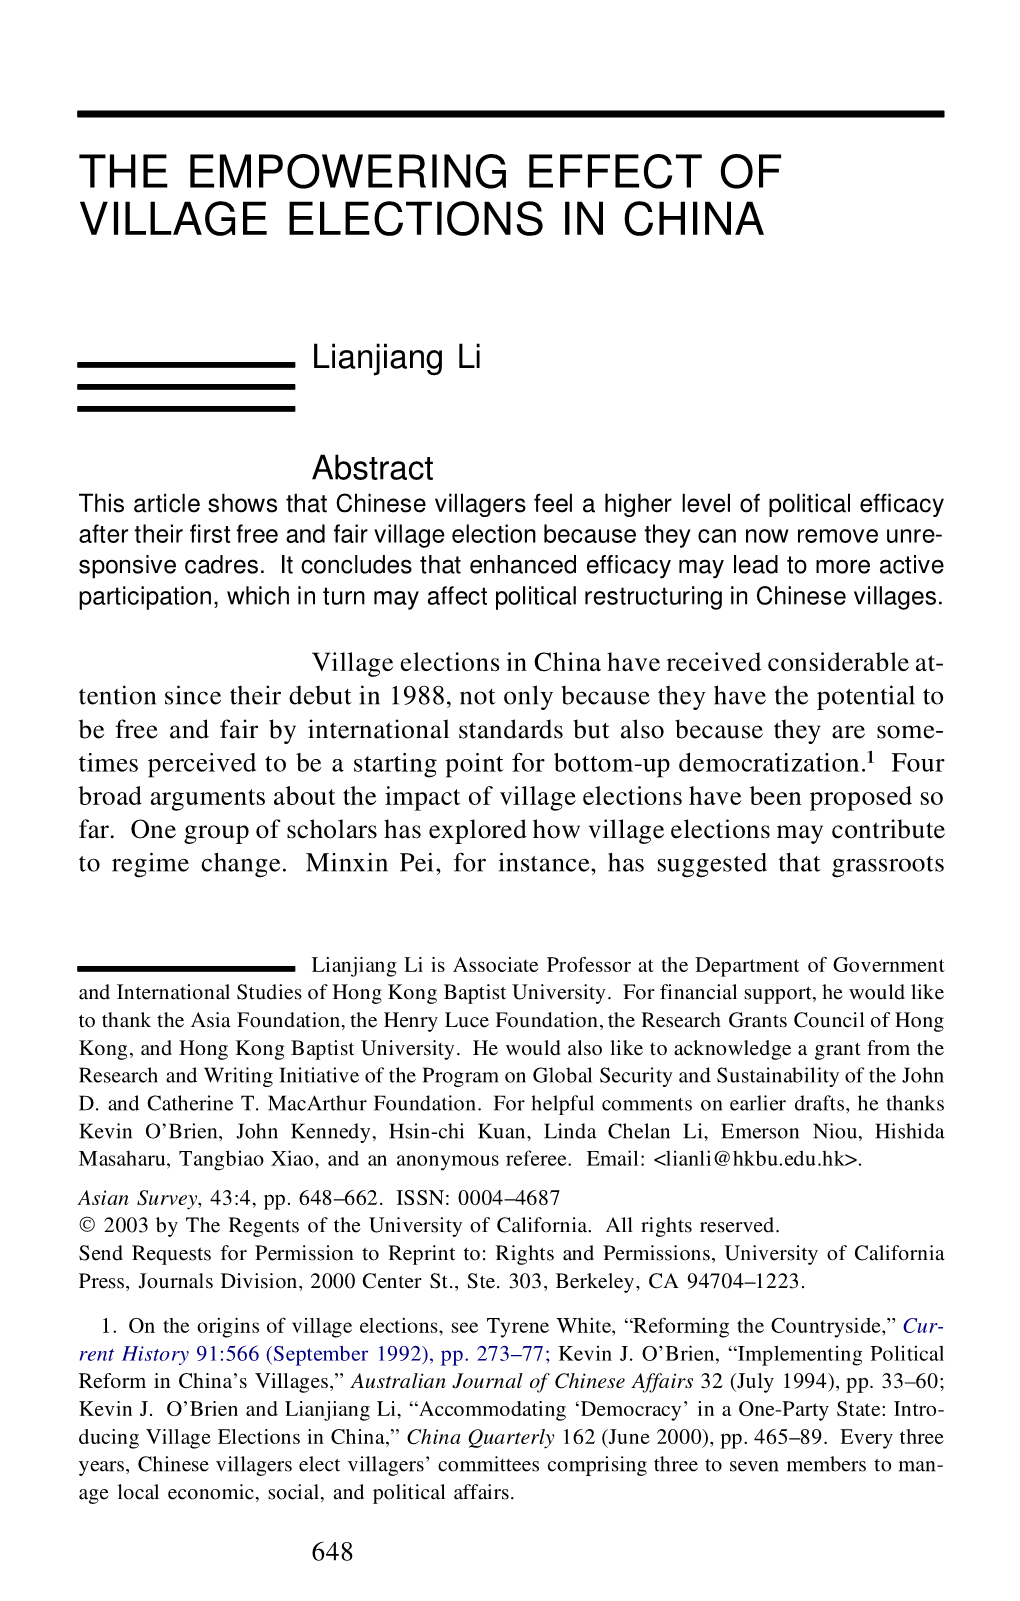 The Empowering Effect of Village Elections in China